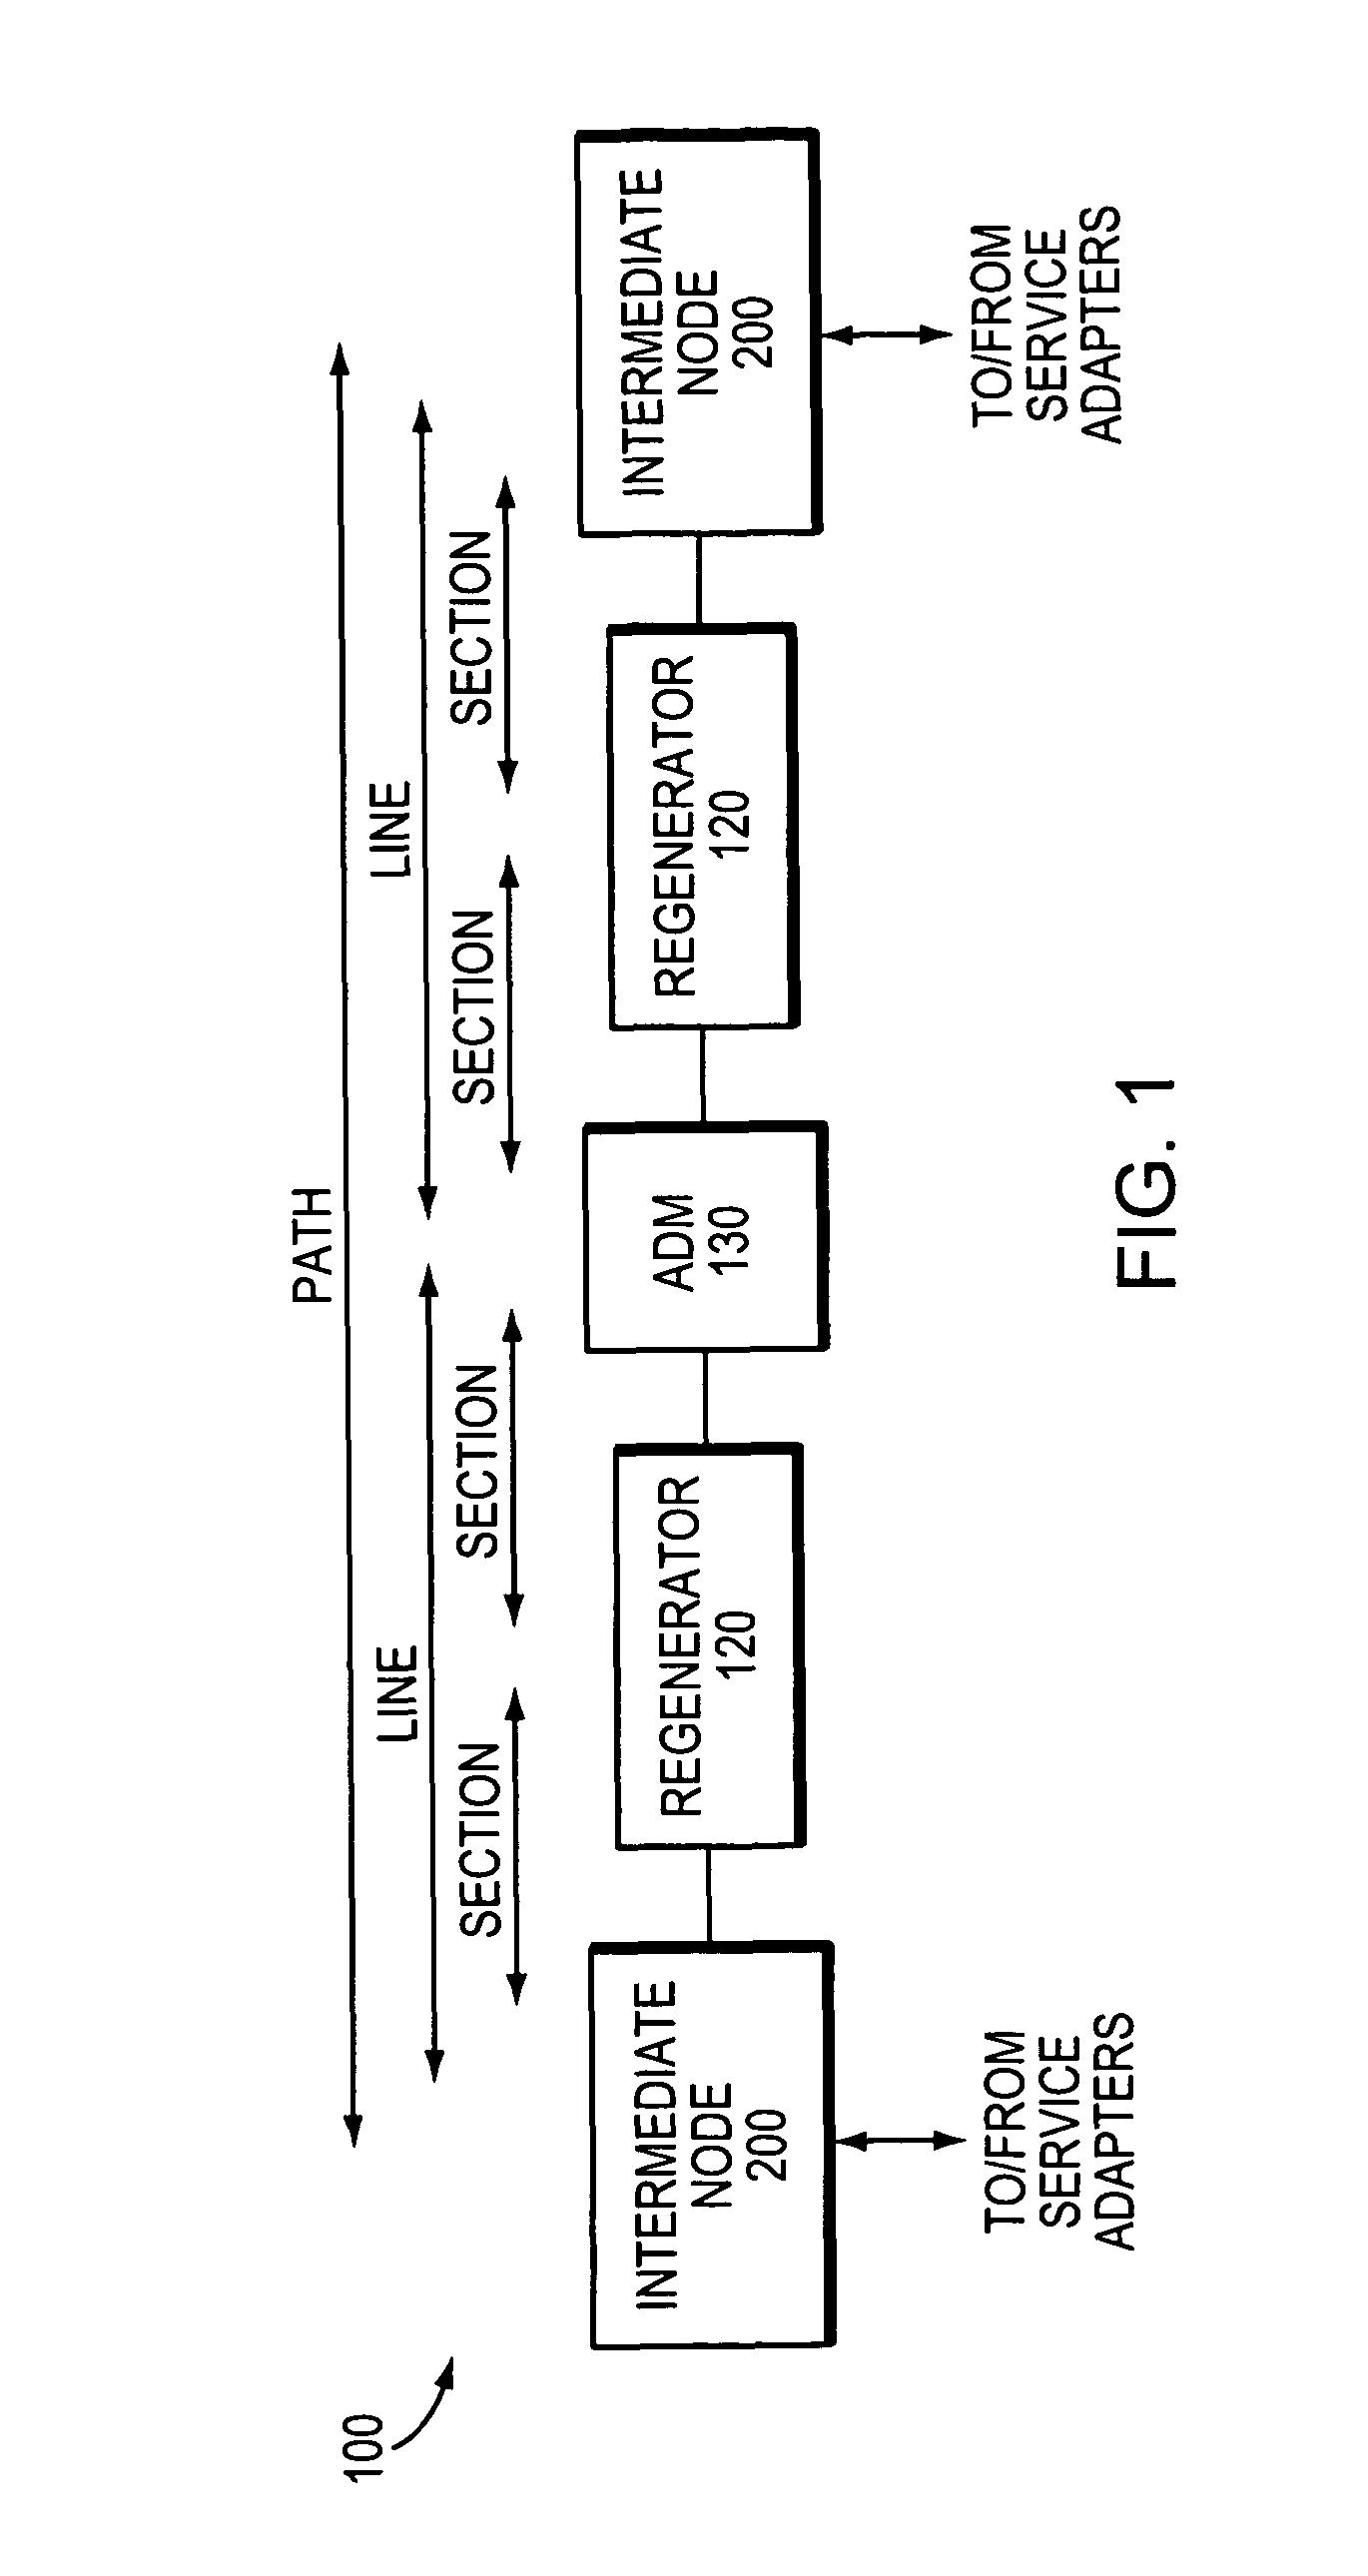 Method and apparatus for enabling LCAS-like feature through embedded software